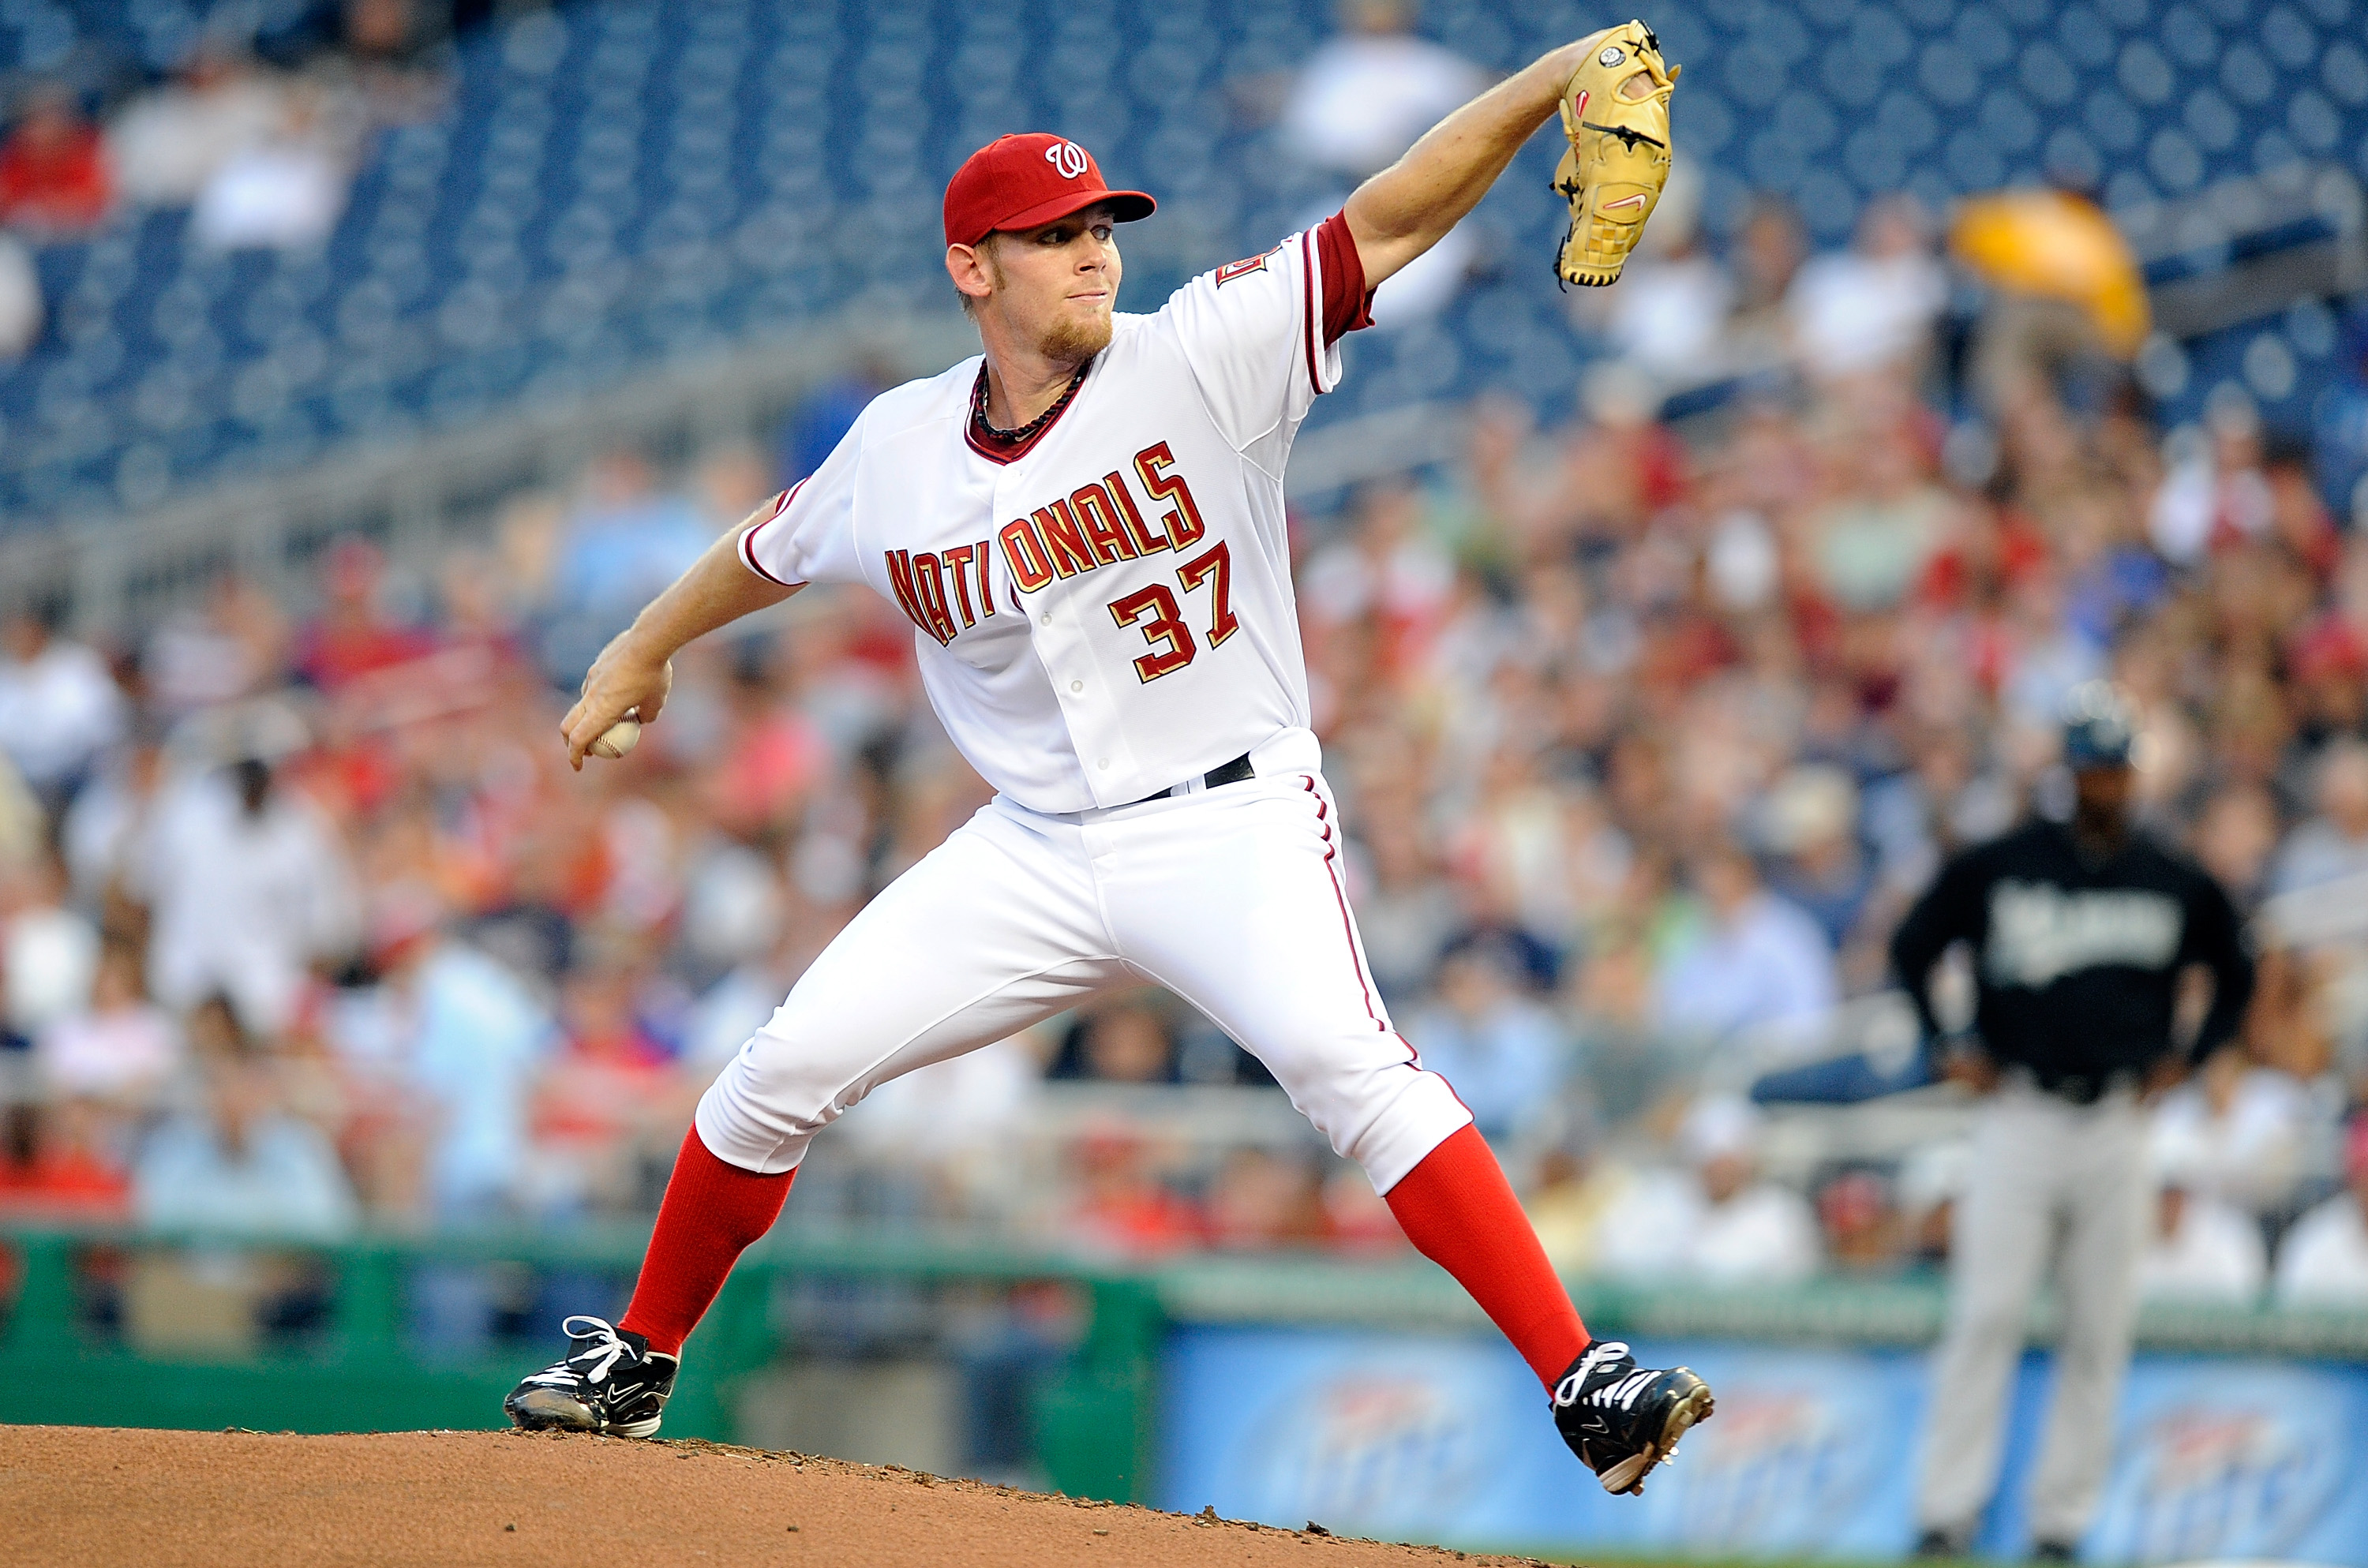 Why Stephen Strasburg should return home to pitch for Padres